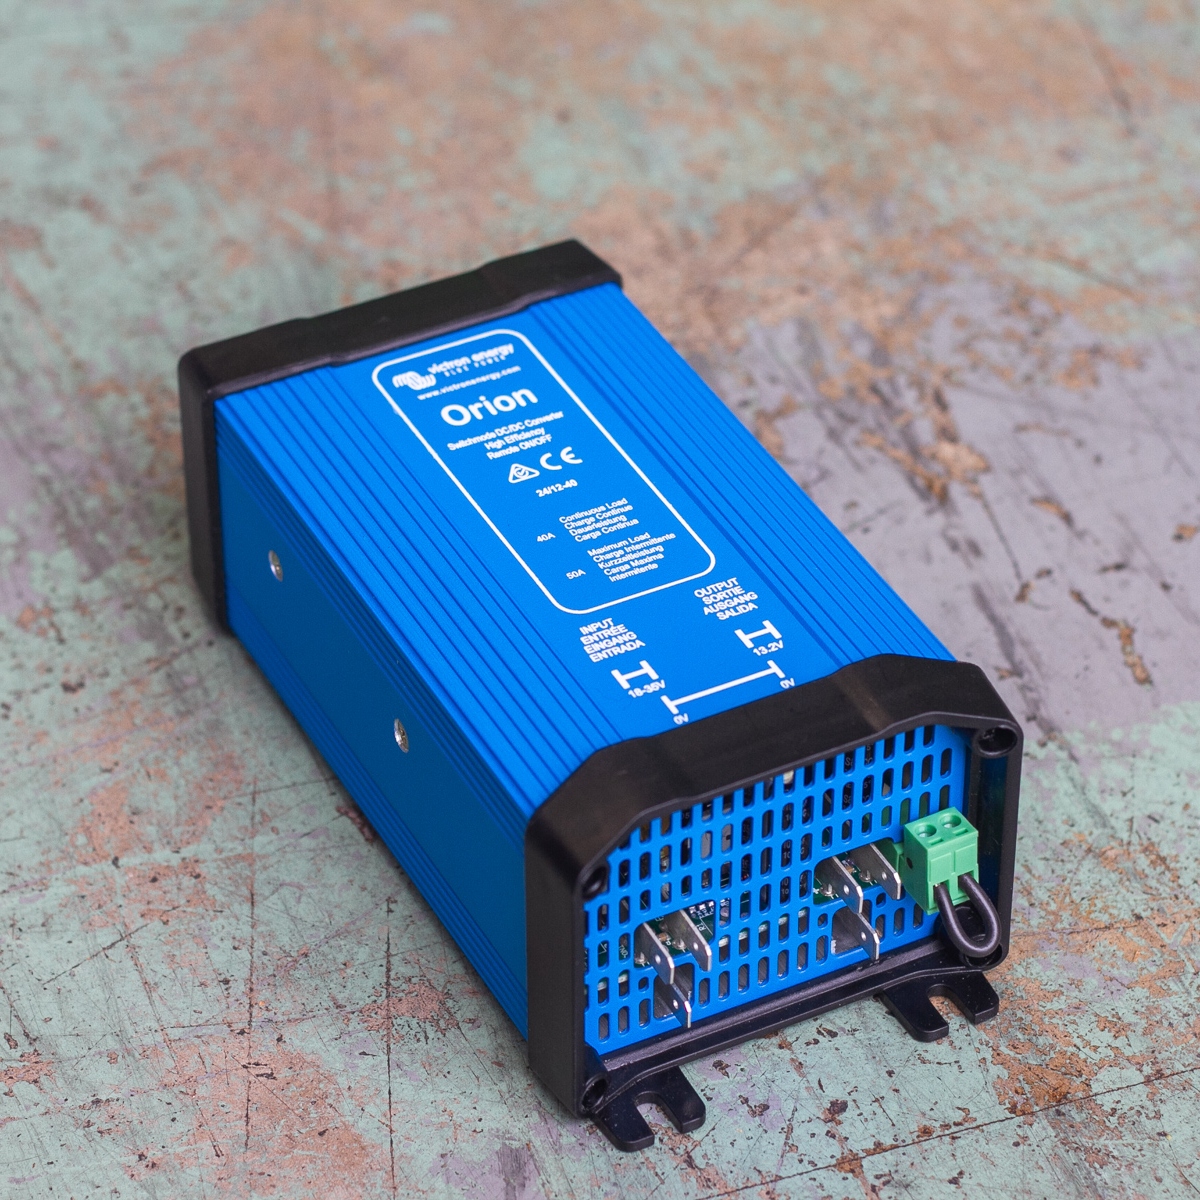 The Victron Orion 24/12-40 DC-DC Converter - 24V to 12V 40A Non-isolated Converter with wiring connections is displayed on a textured surface.